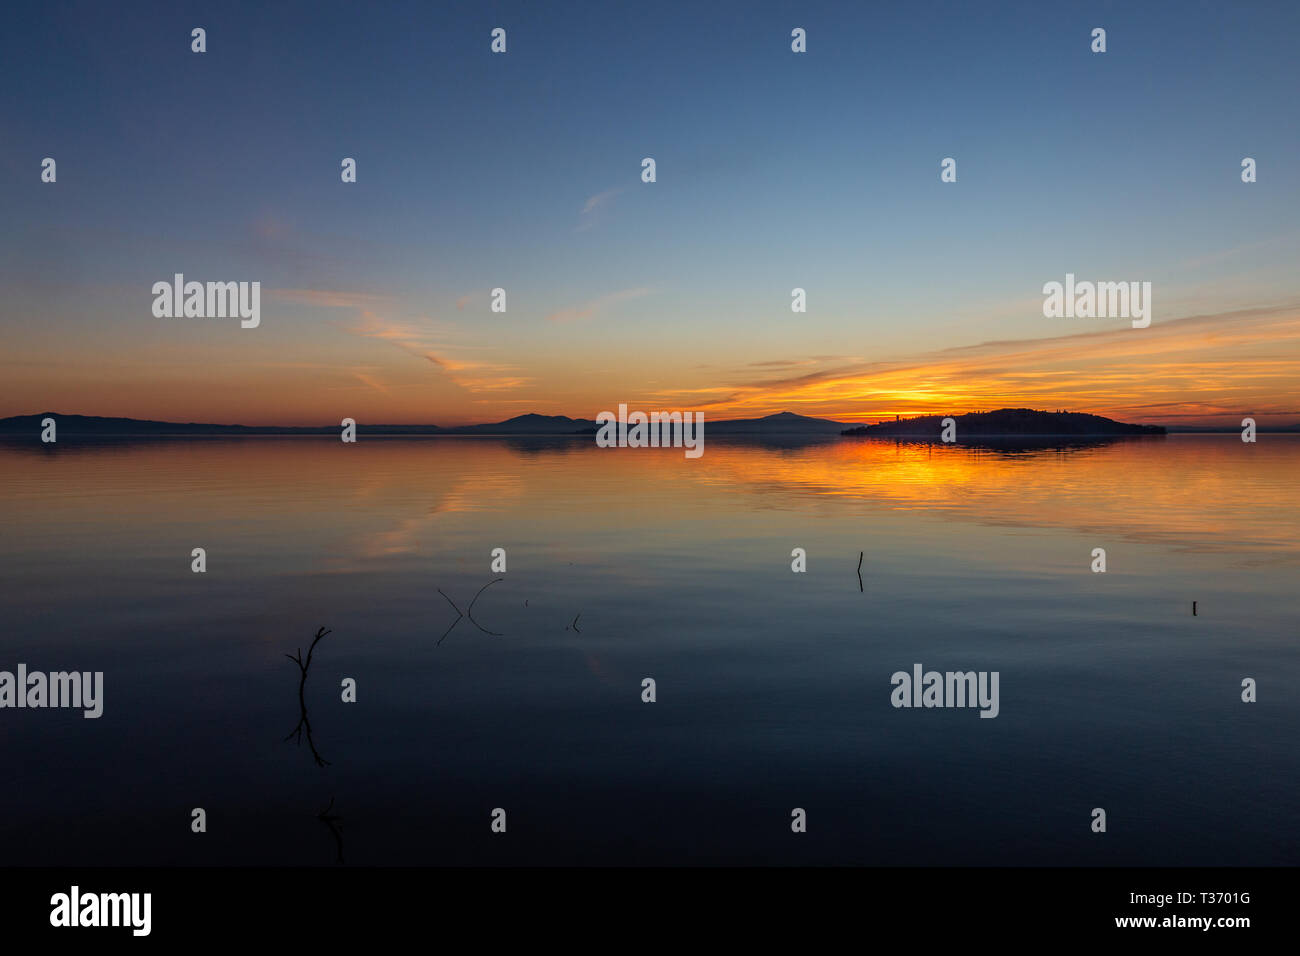 Symmetrcal, beautiful view of Trasimeno lake (Umbria, Italy) at sunset, with orange and blue tones in the sky Stock Photo